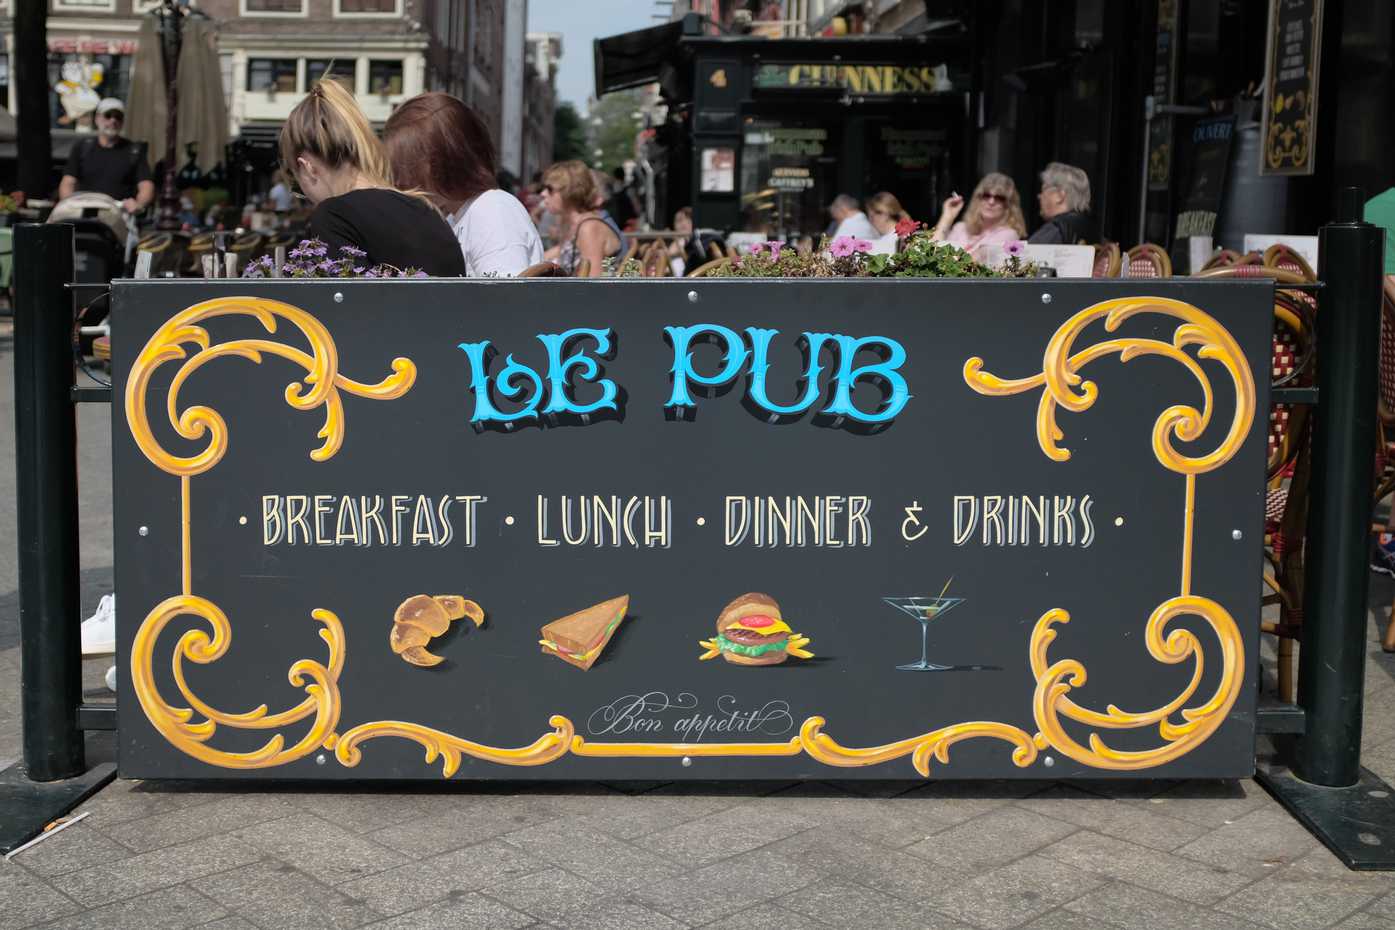 A handpainted sign for a pub with outdoor seating